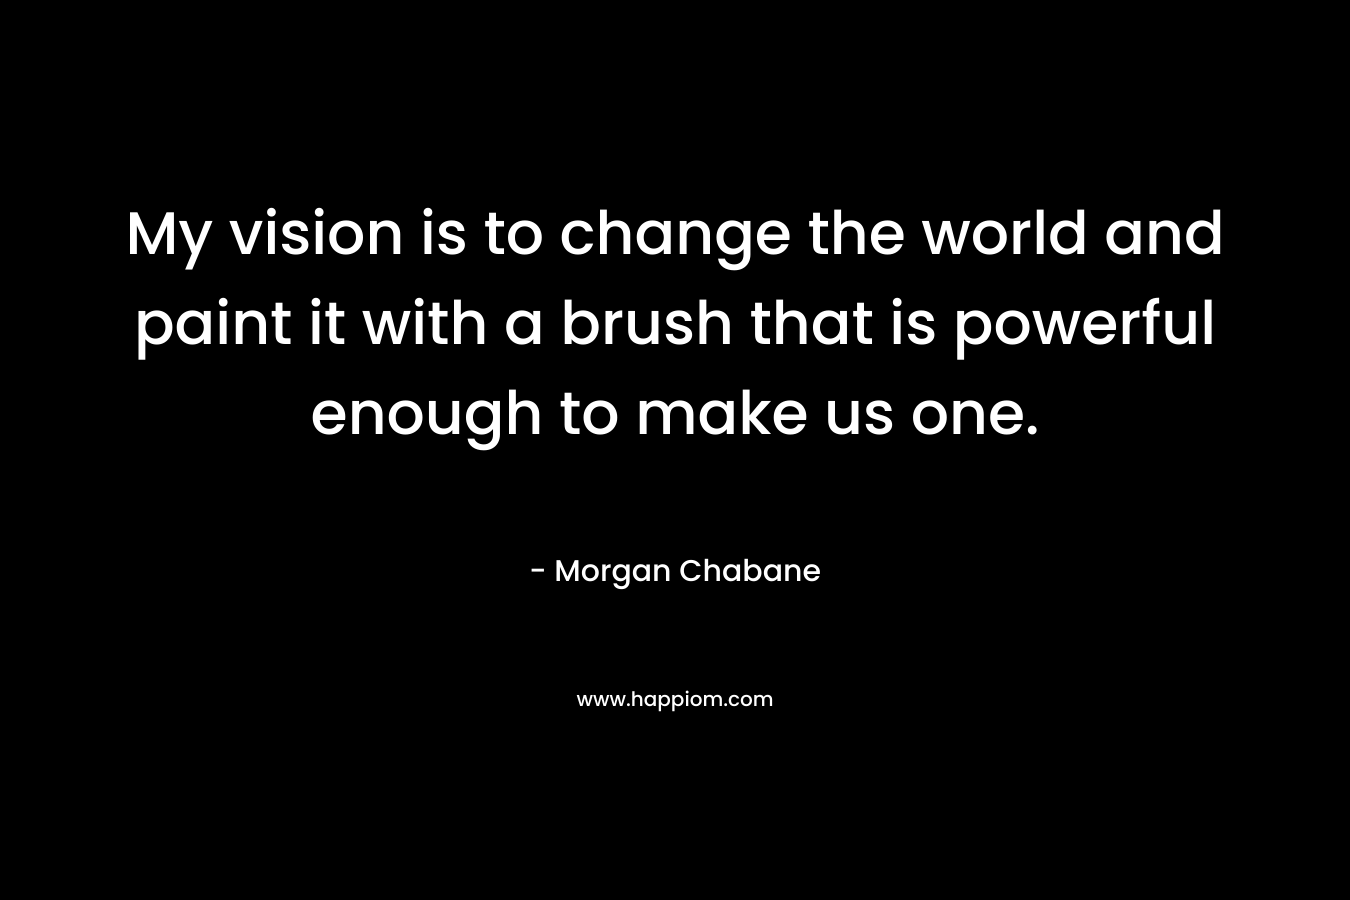 My vision is to change the world and paint it with a brush that is powerful enough to make us one. – Morgan Chabane